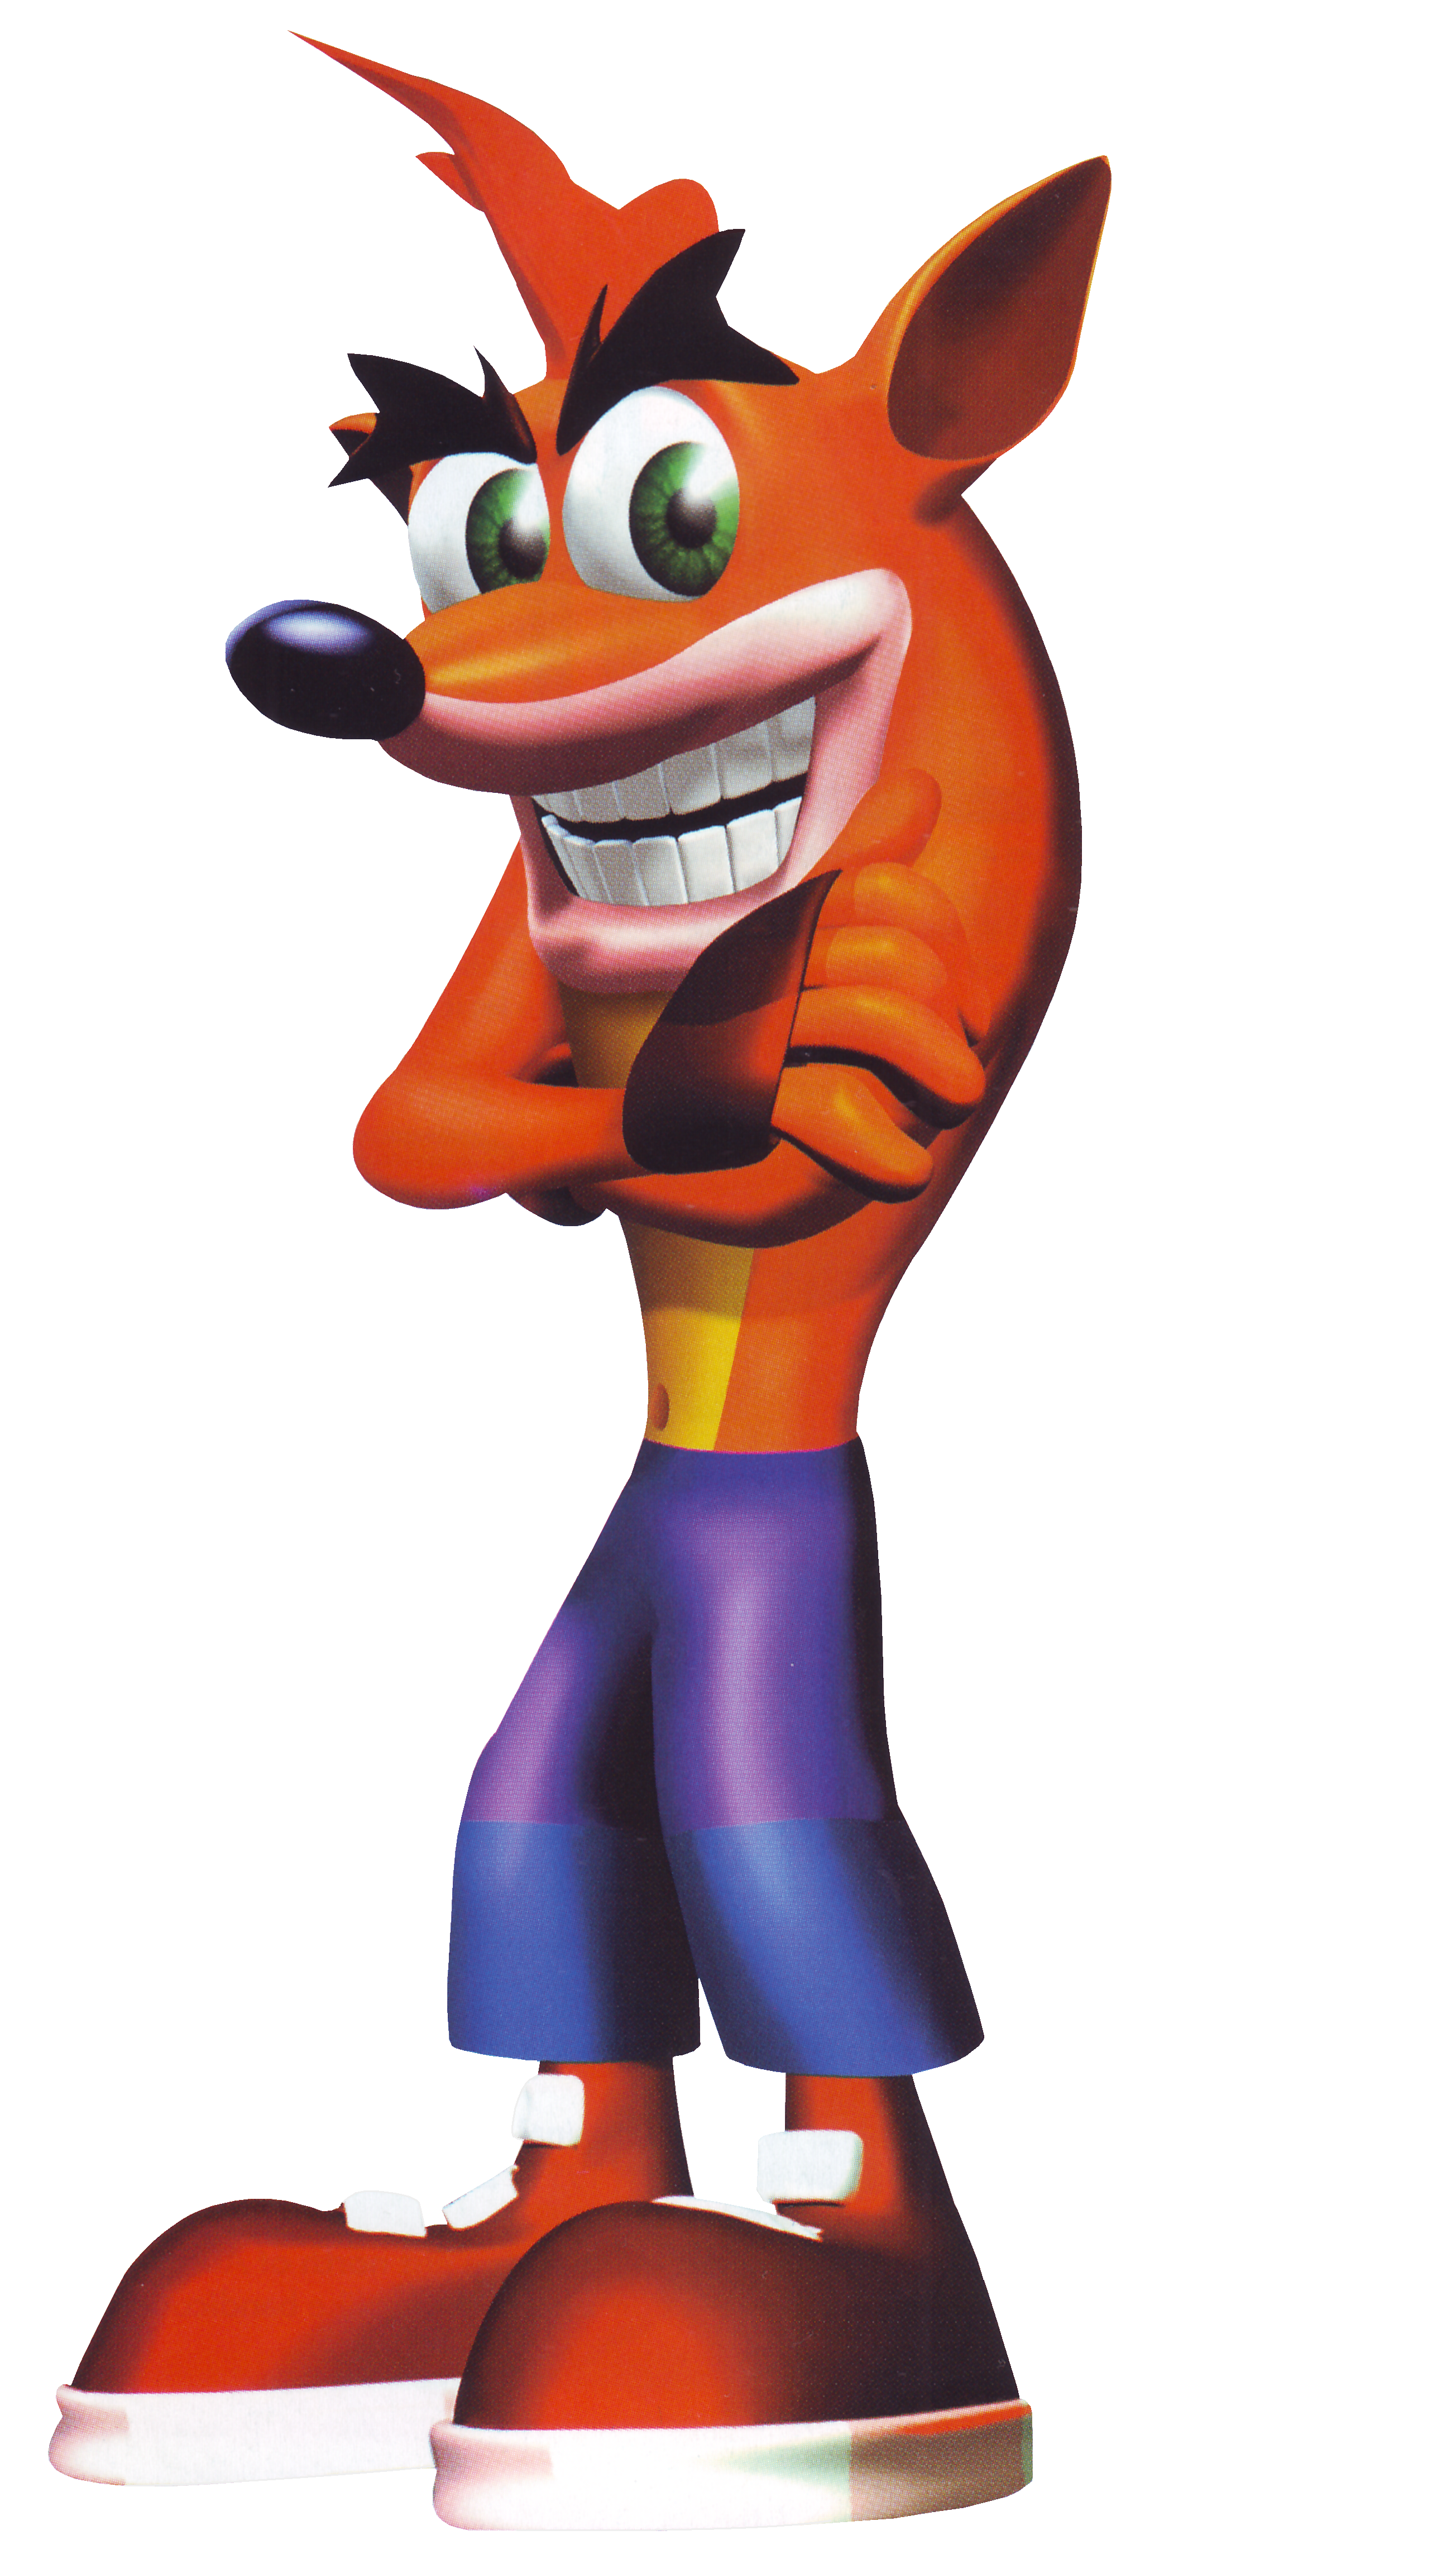 WUL for anyone who can find me a larger pic of crash bandicoot | IGN Boards